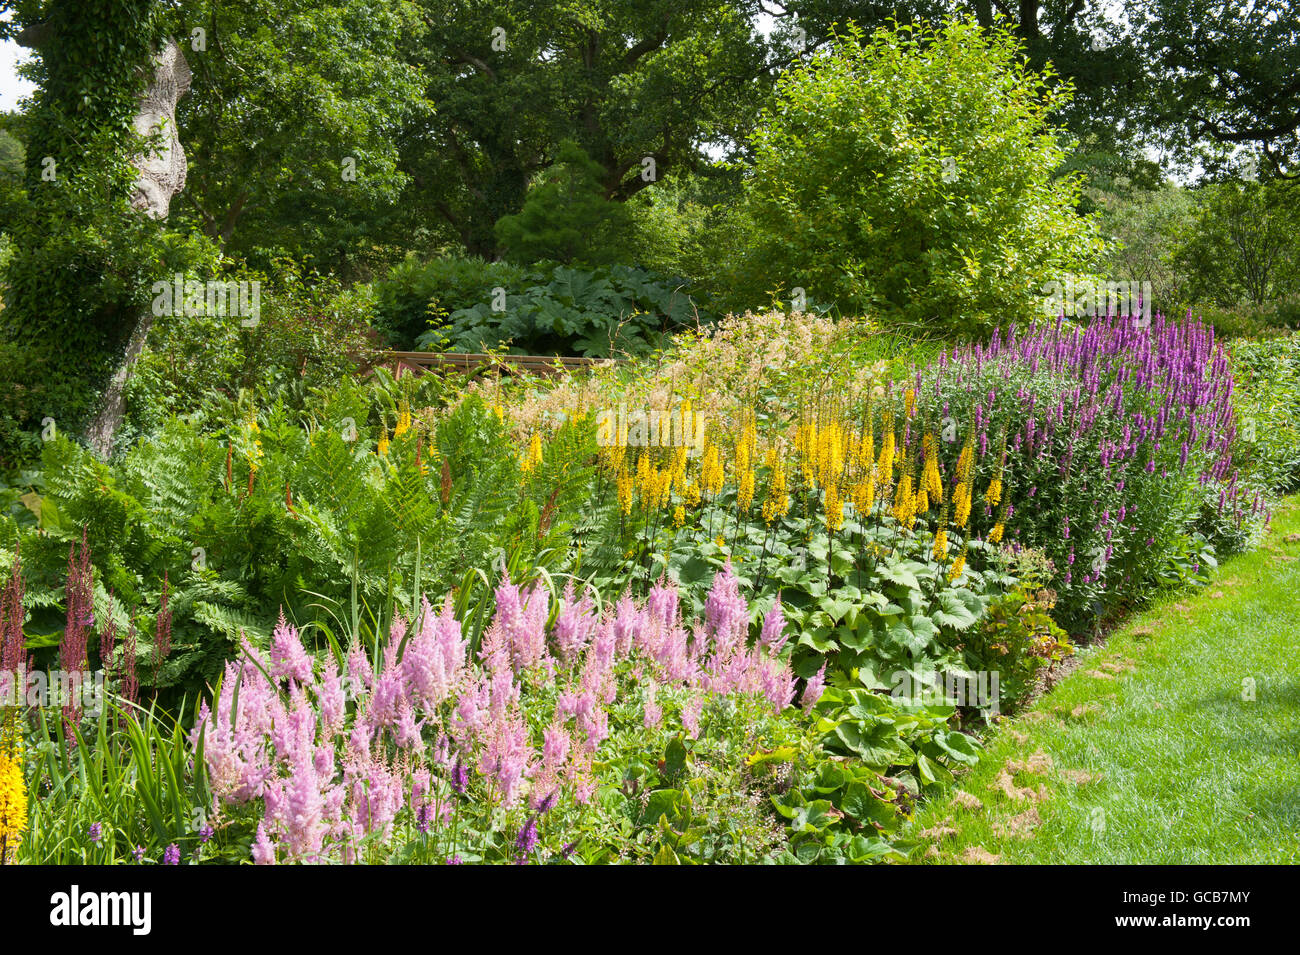 Flowerbed of Pink Astilbe, Yellow Ligularia and Purple Lythrum in Summer Stock Photo